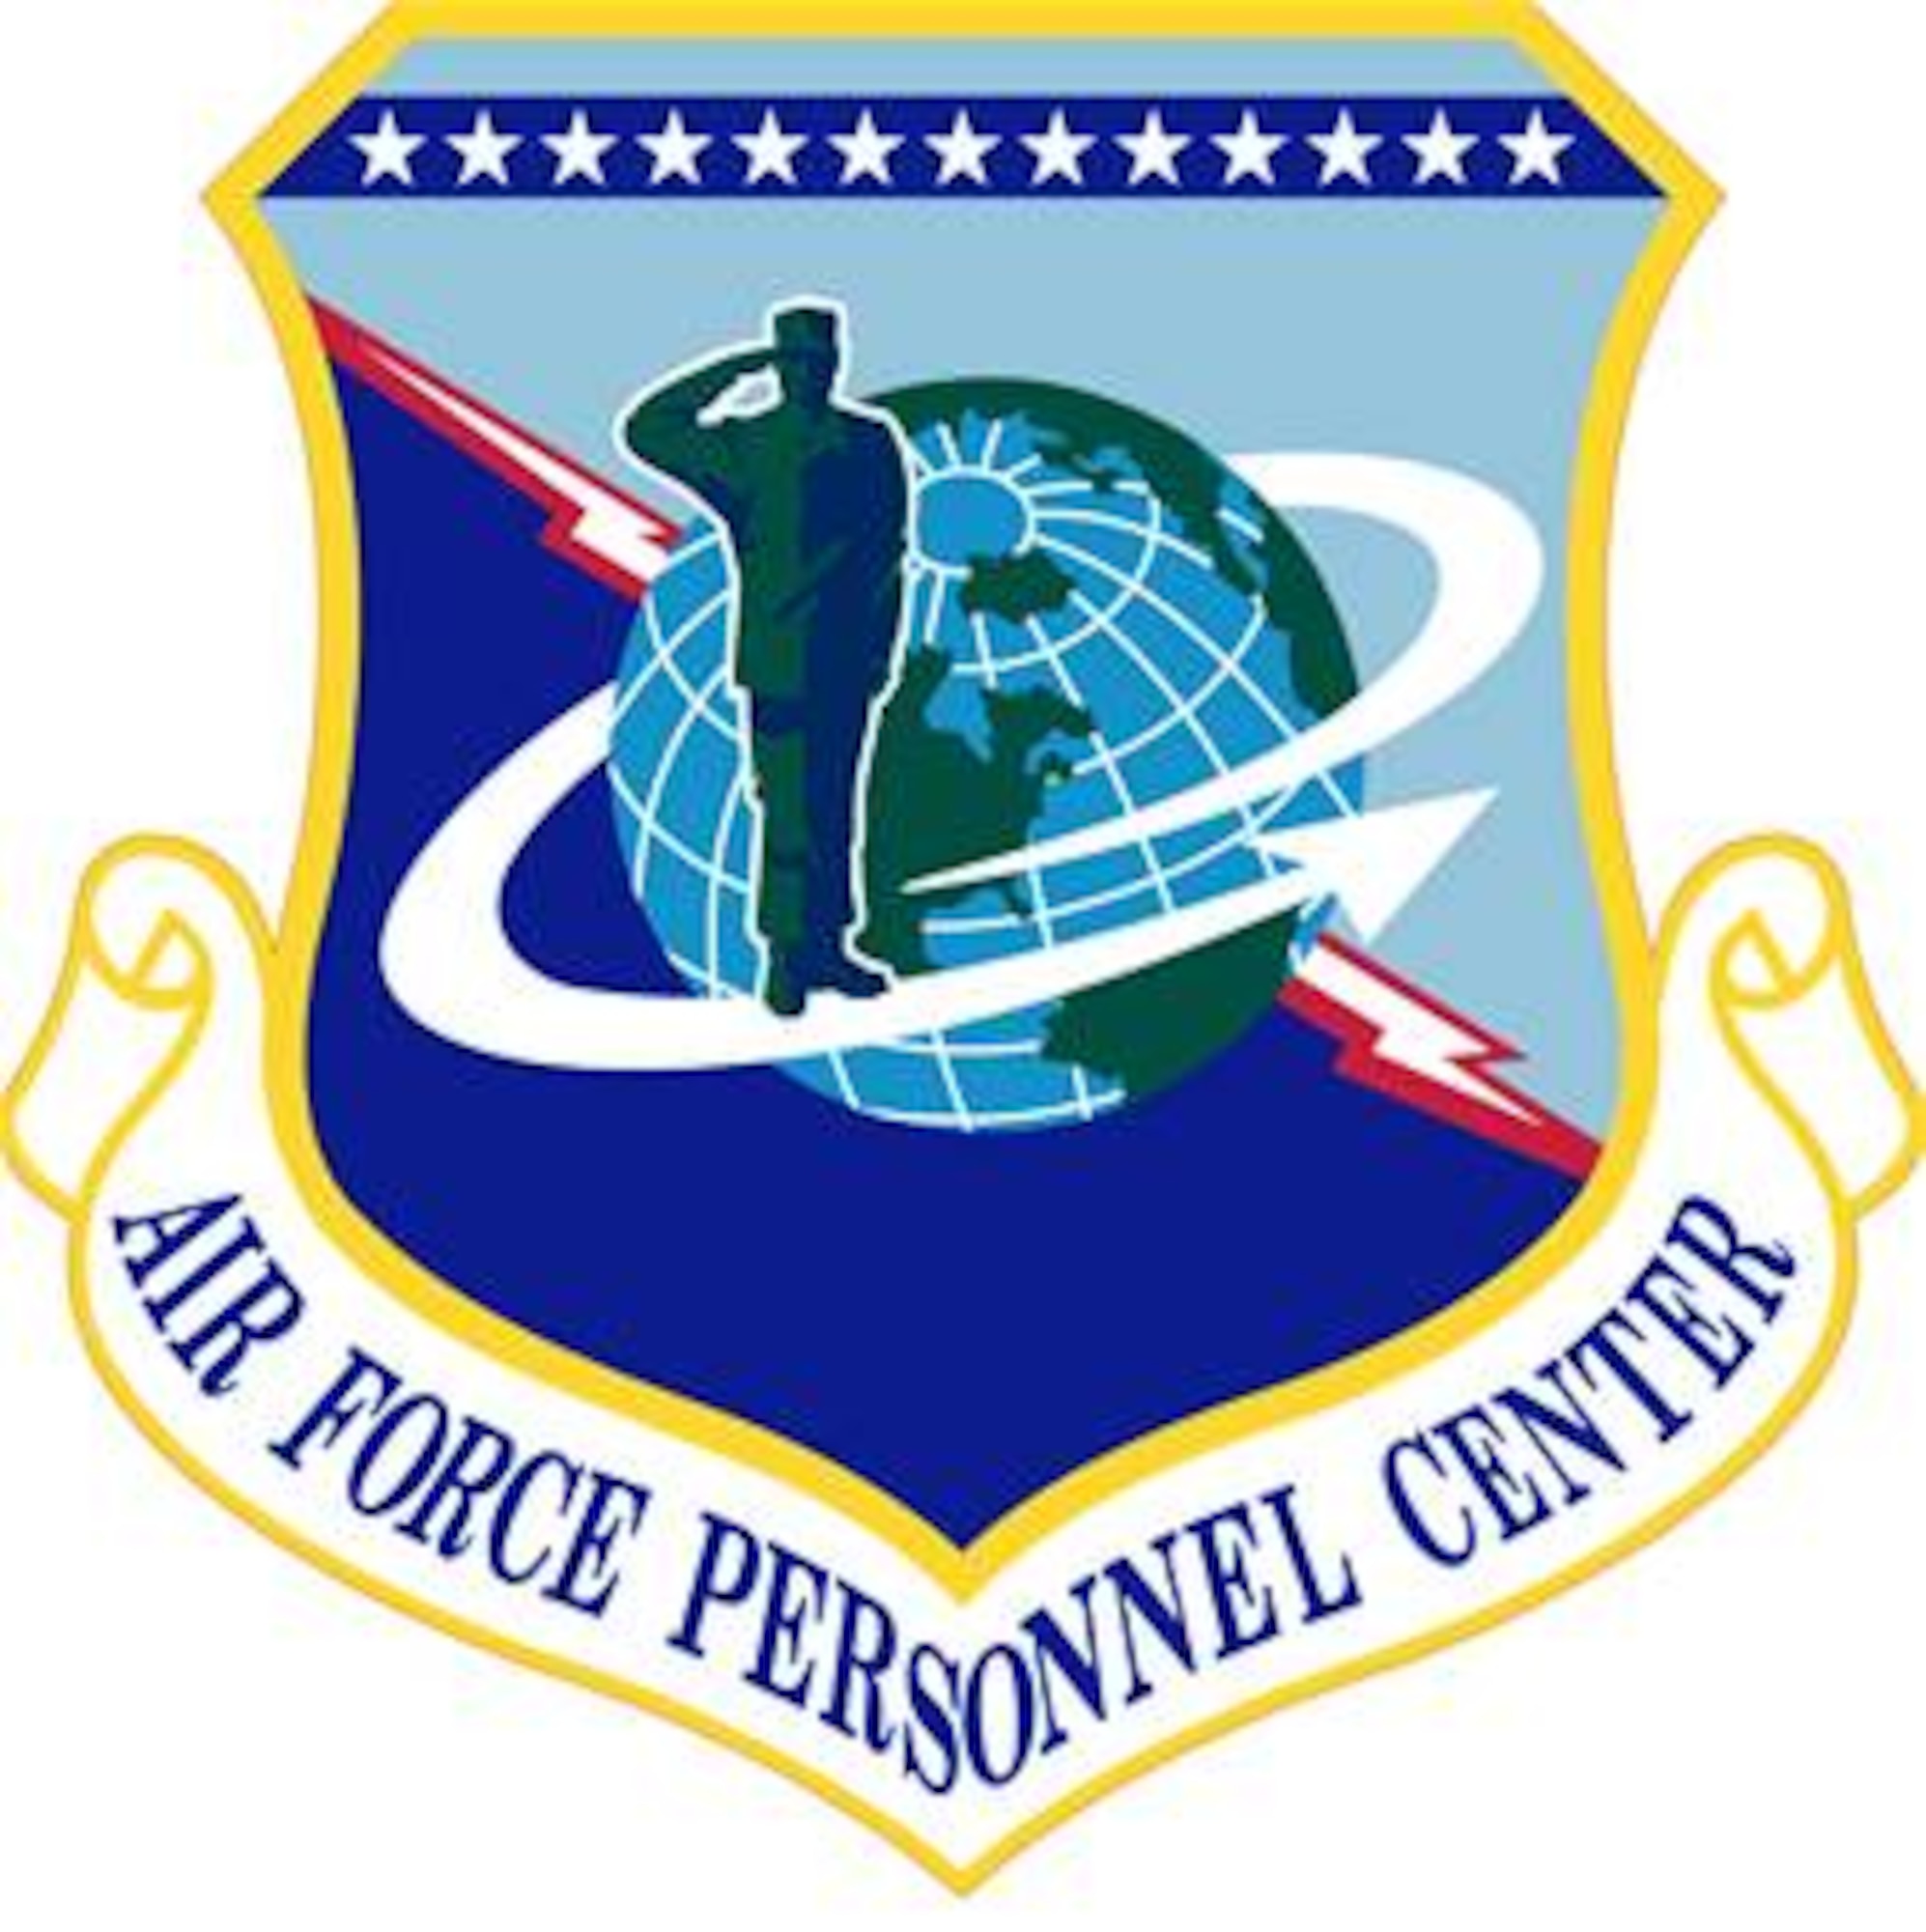 Air Force Personnel Center (Color). Image provided by the Air Force Historical Research Agency. In accordance with Chapter 3 of AFI 84-105, commercial reproduction of this emblem is NOT permitted without the permission of the proponent organizational/unit commander. The image is 7x7 inches @ 300 ppi. 